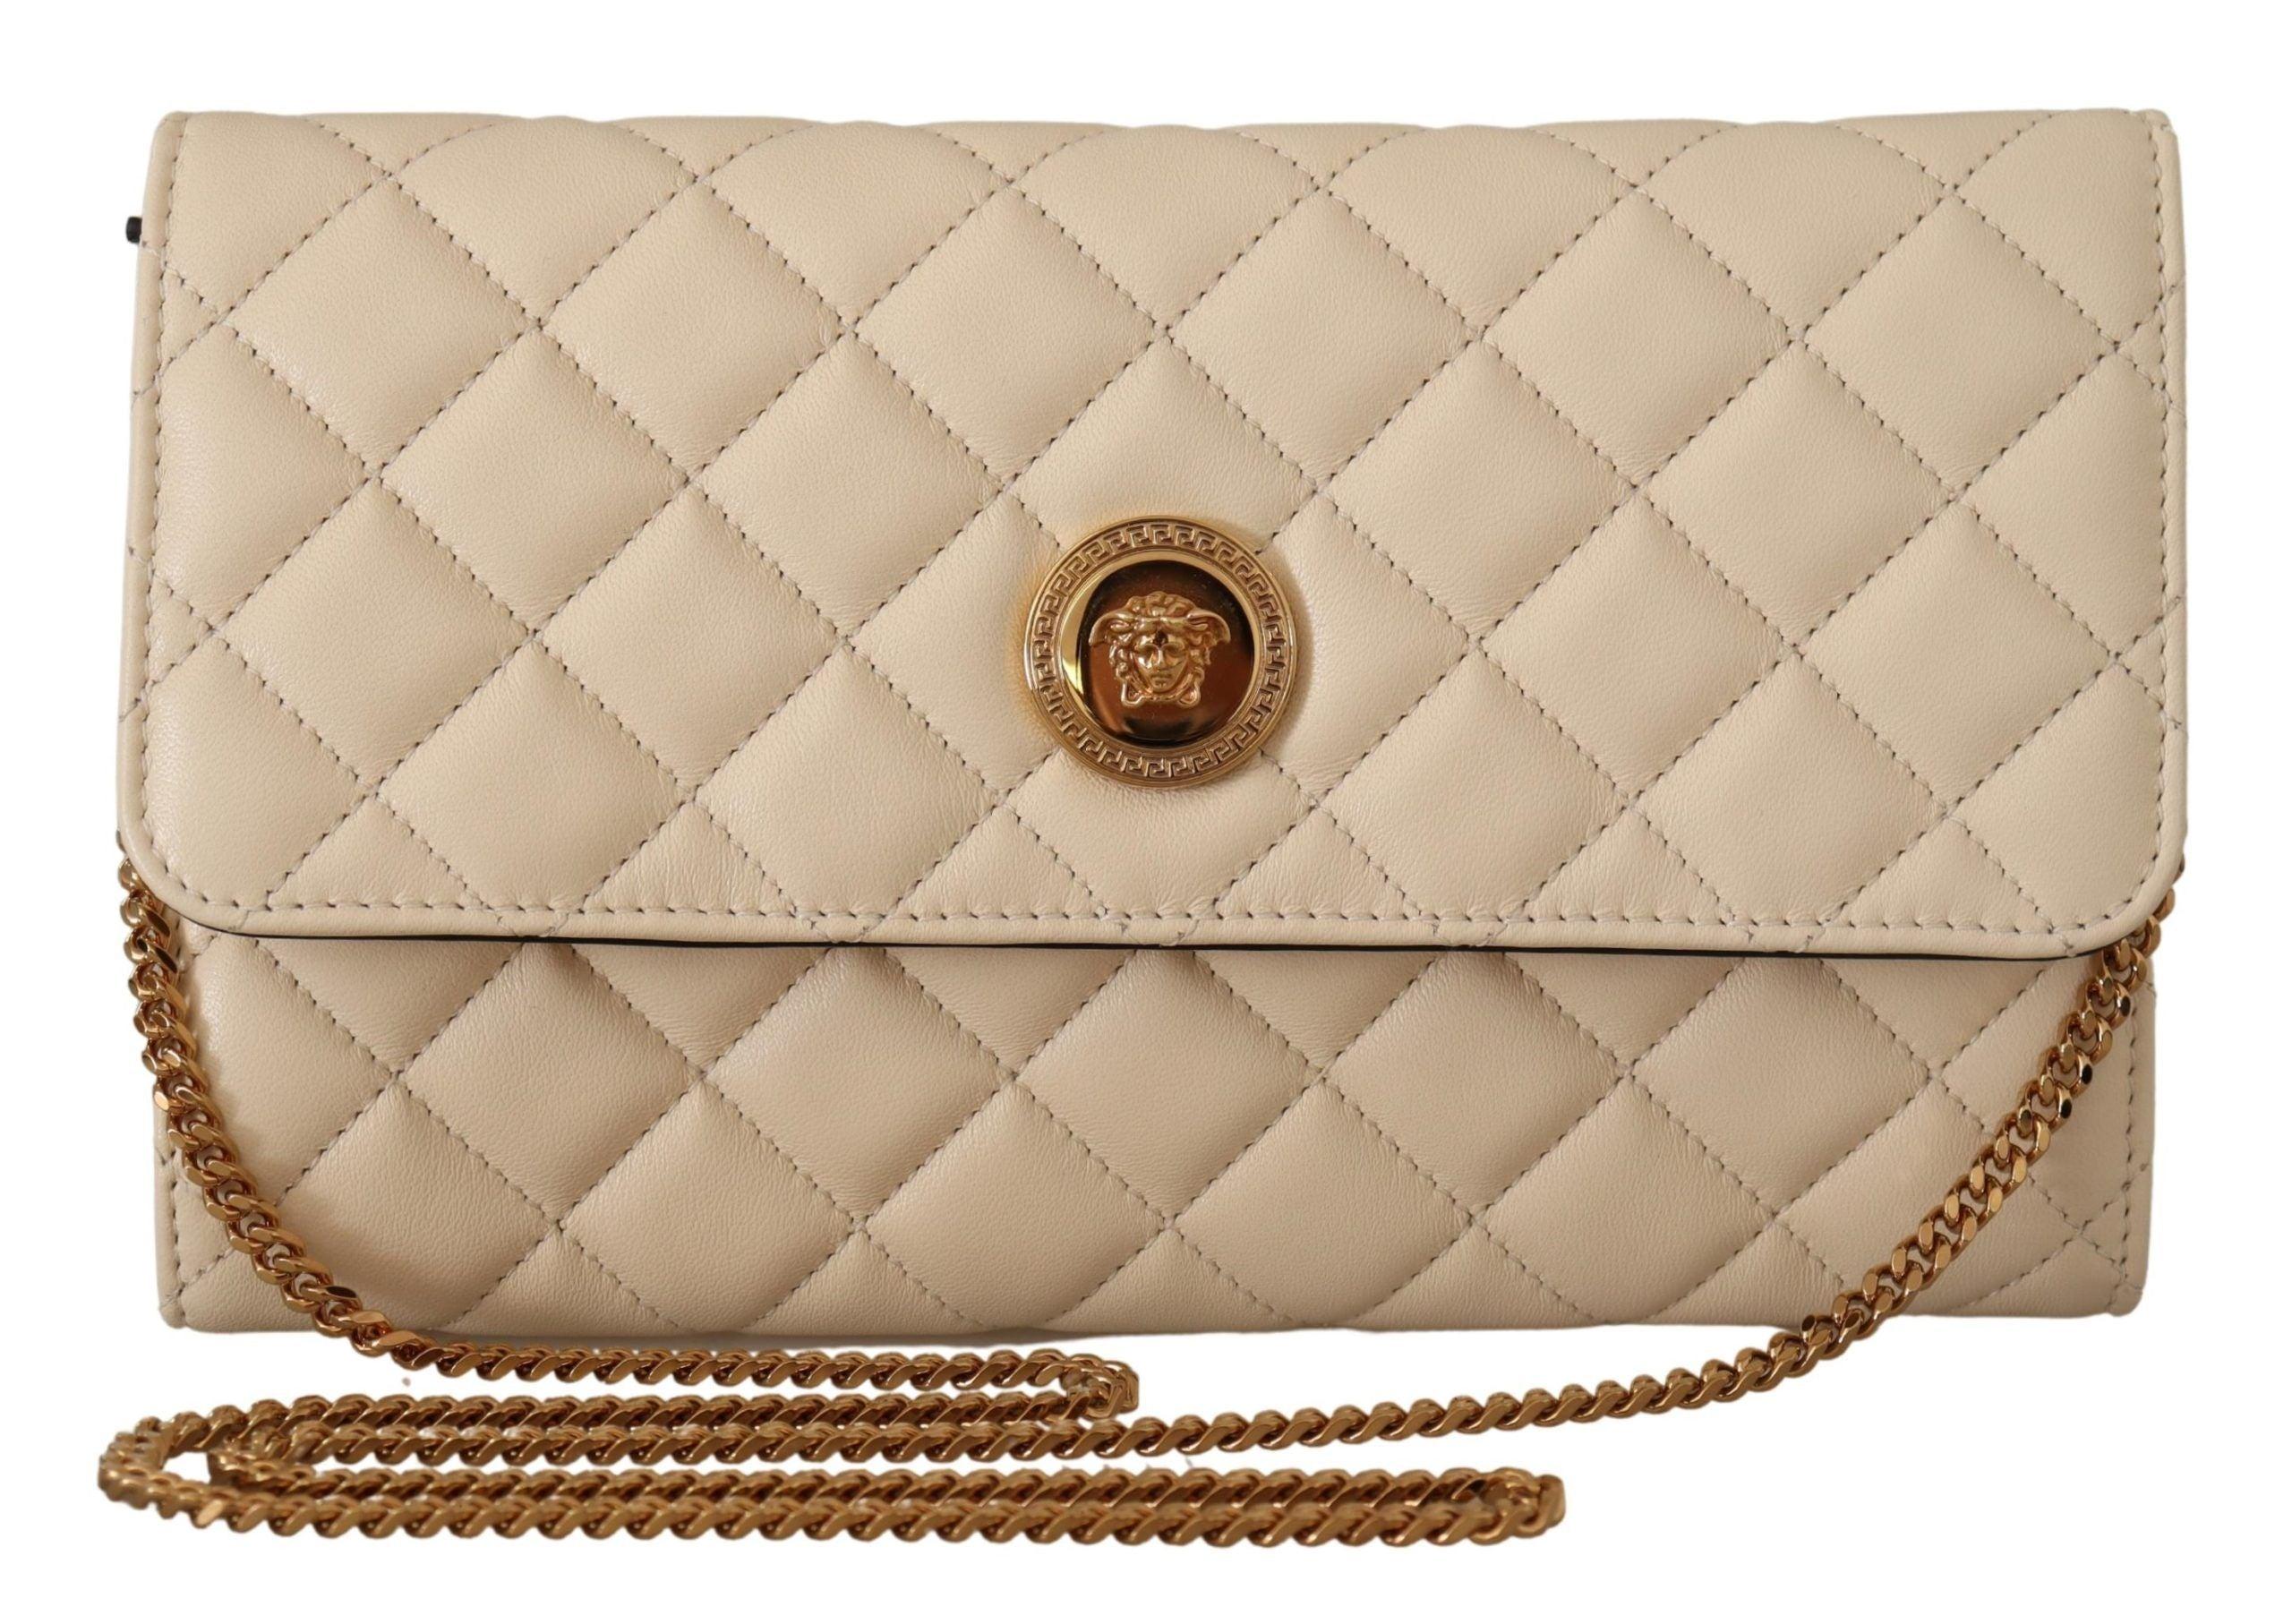 Versace La Medusa Large Crossbody in White Quilted Nappa Leather